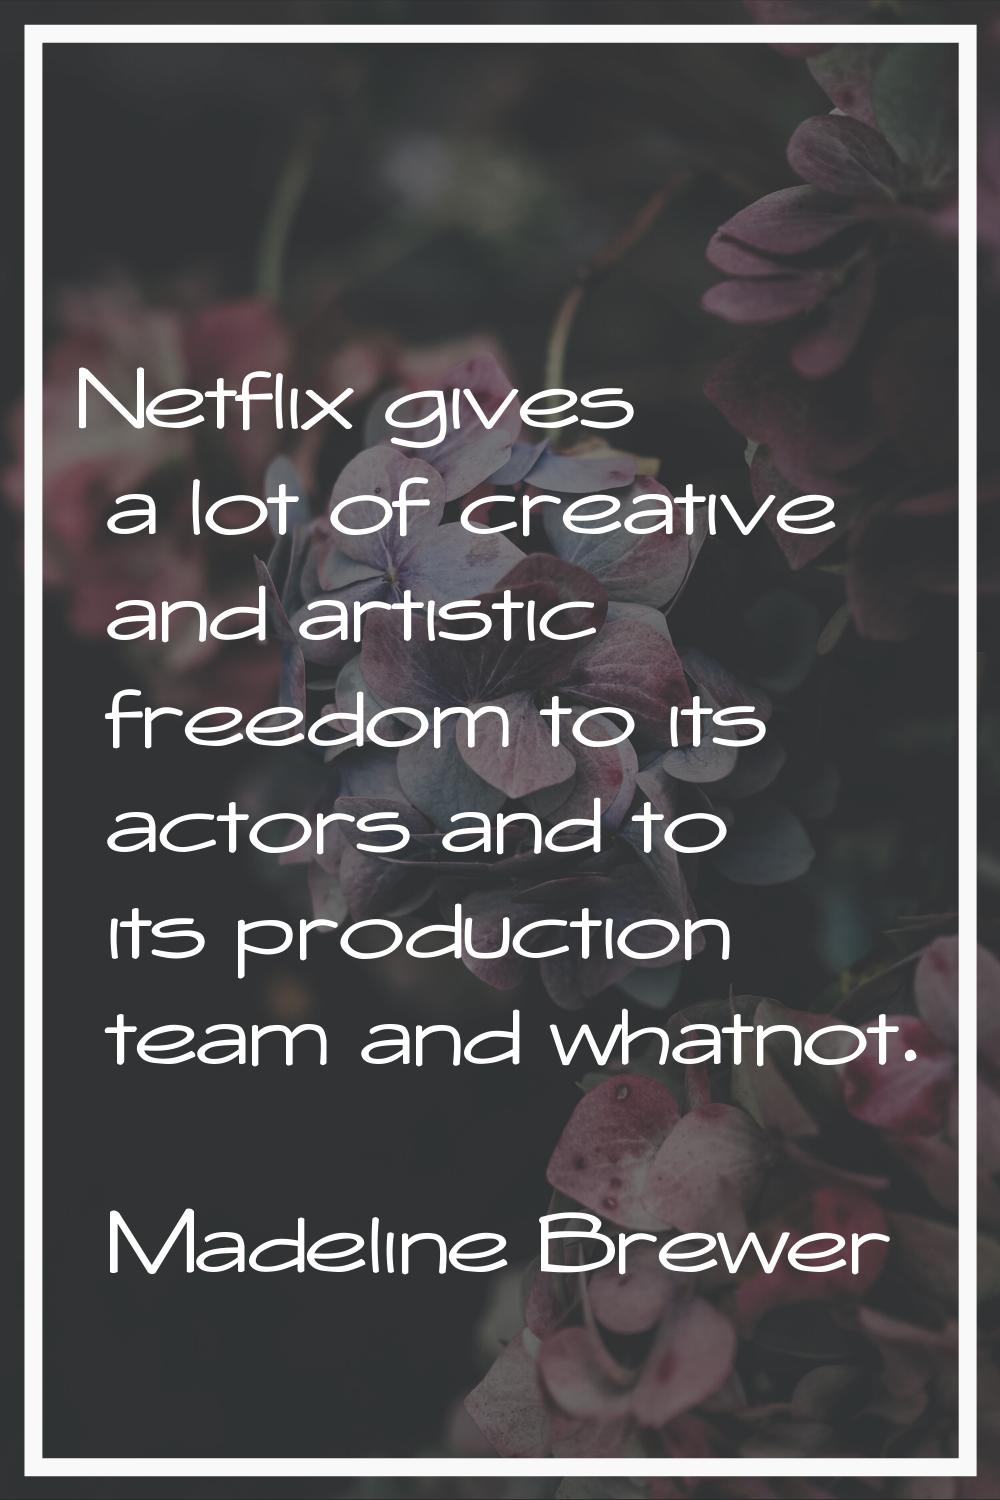 Netflix gives a lot of creative and artistic freedom to its actors and to its production team and w